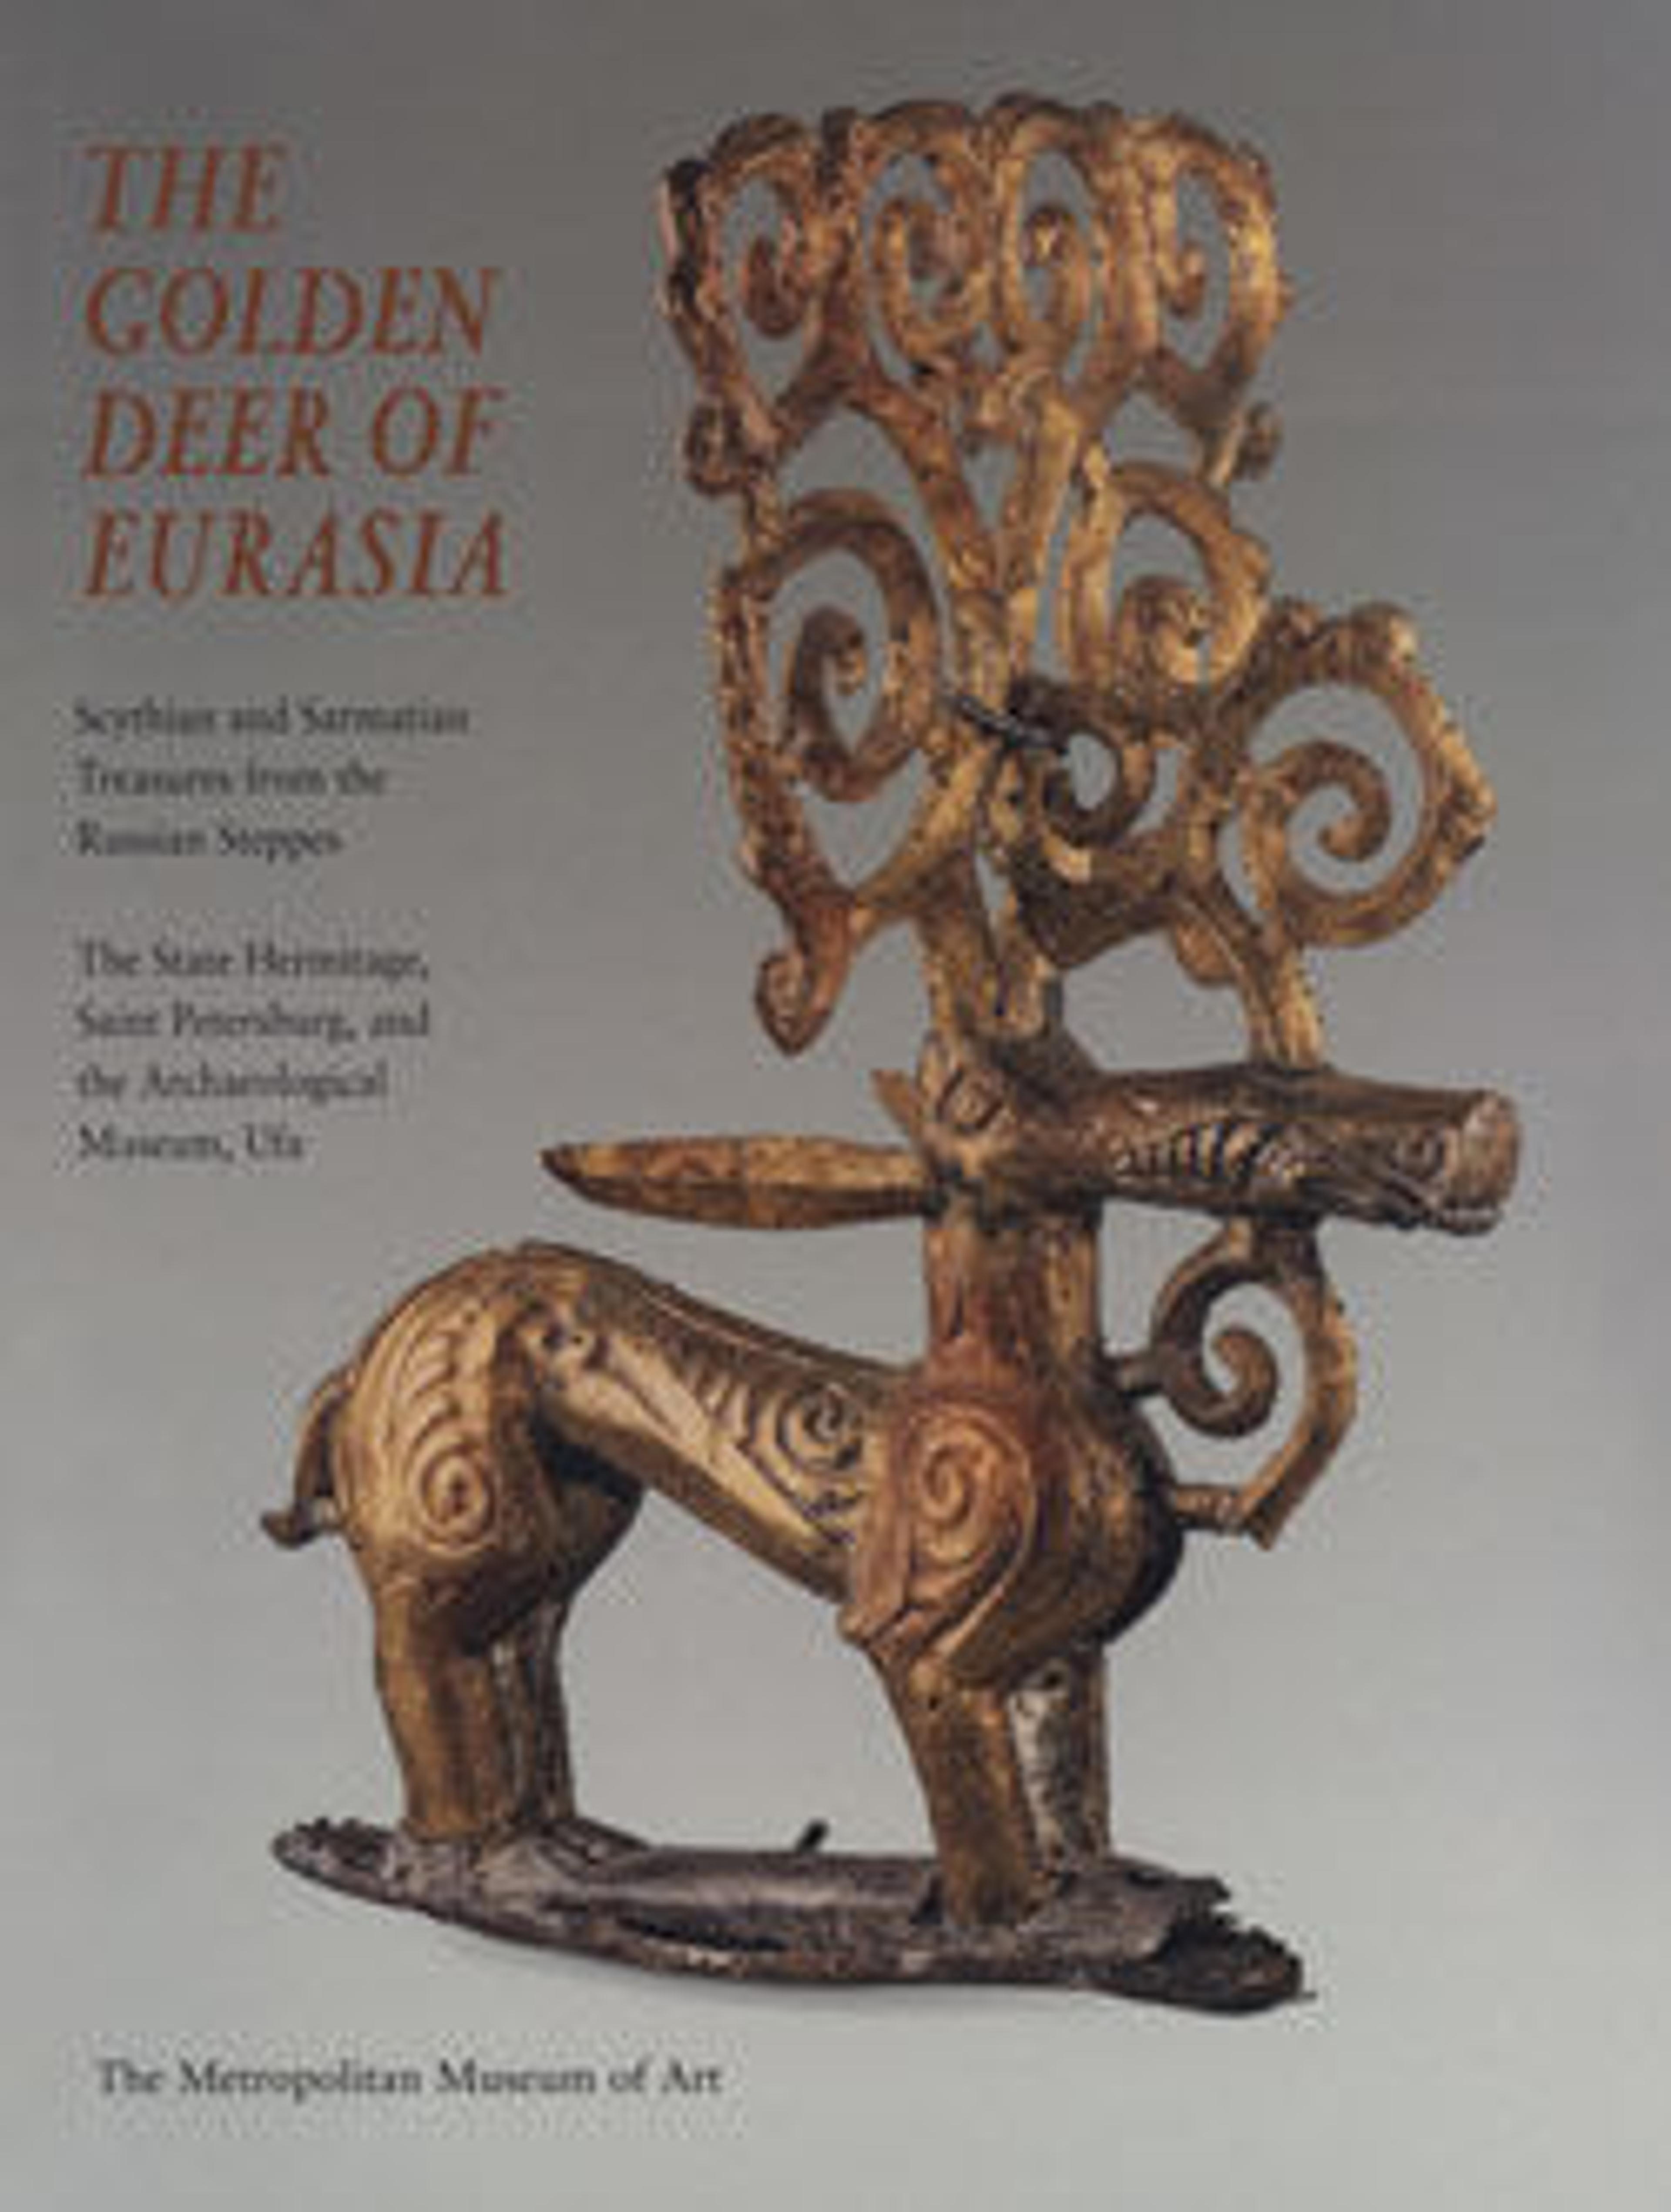 The Golden Deer of Eurasia: Scythian and Sarmatian Treasures from the Russian Steppes